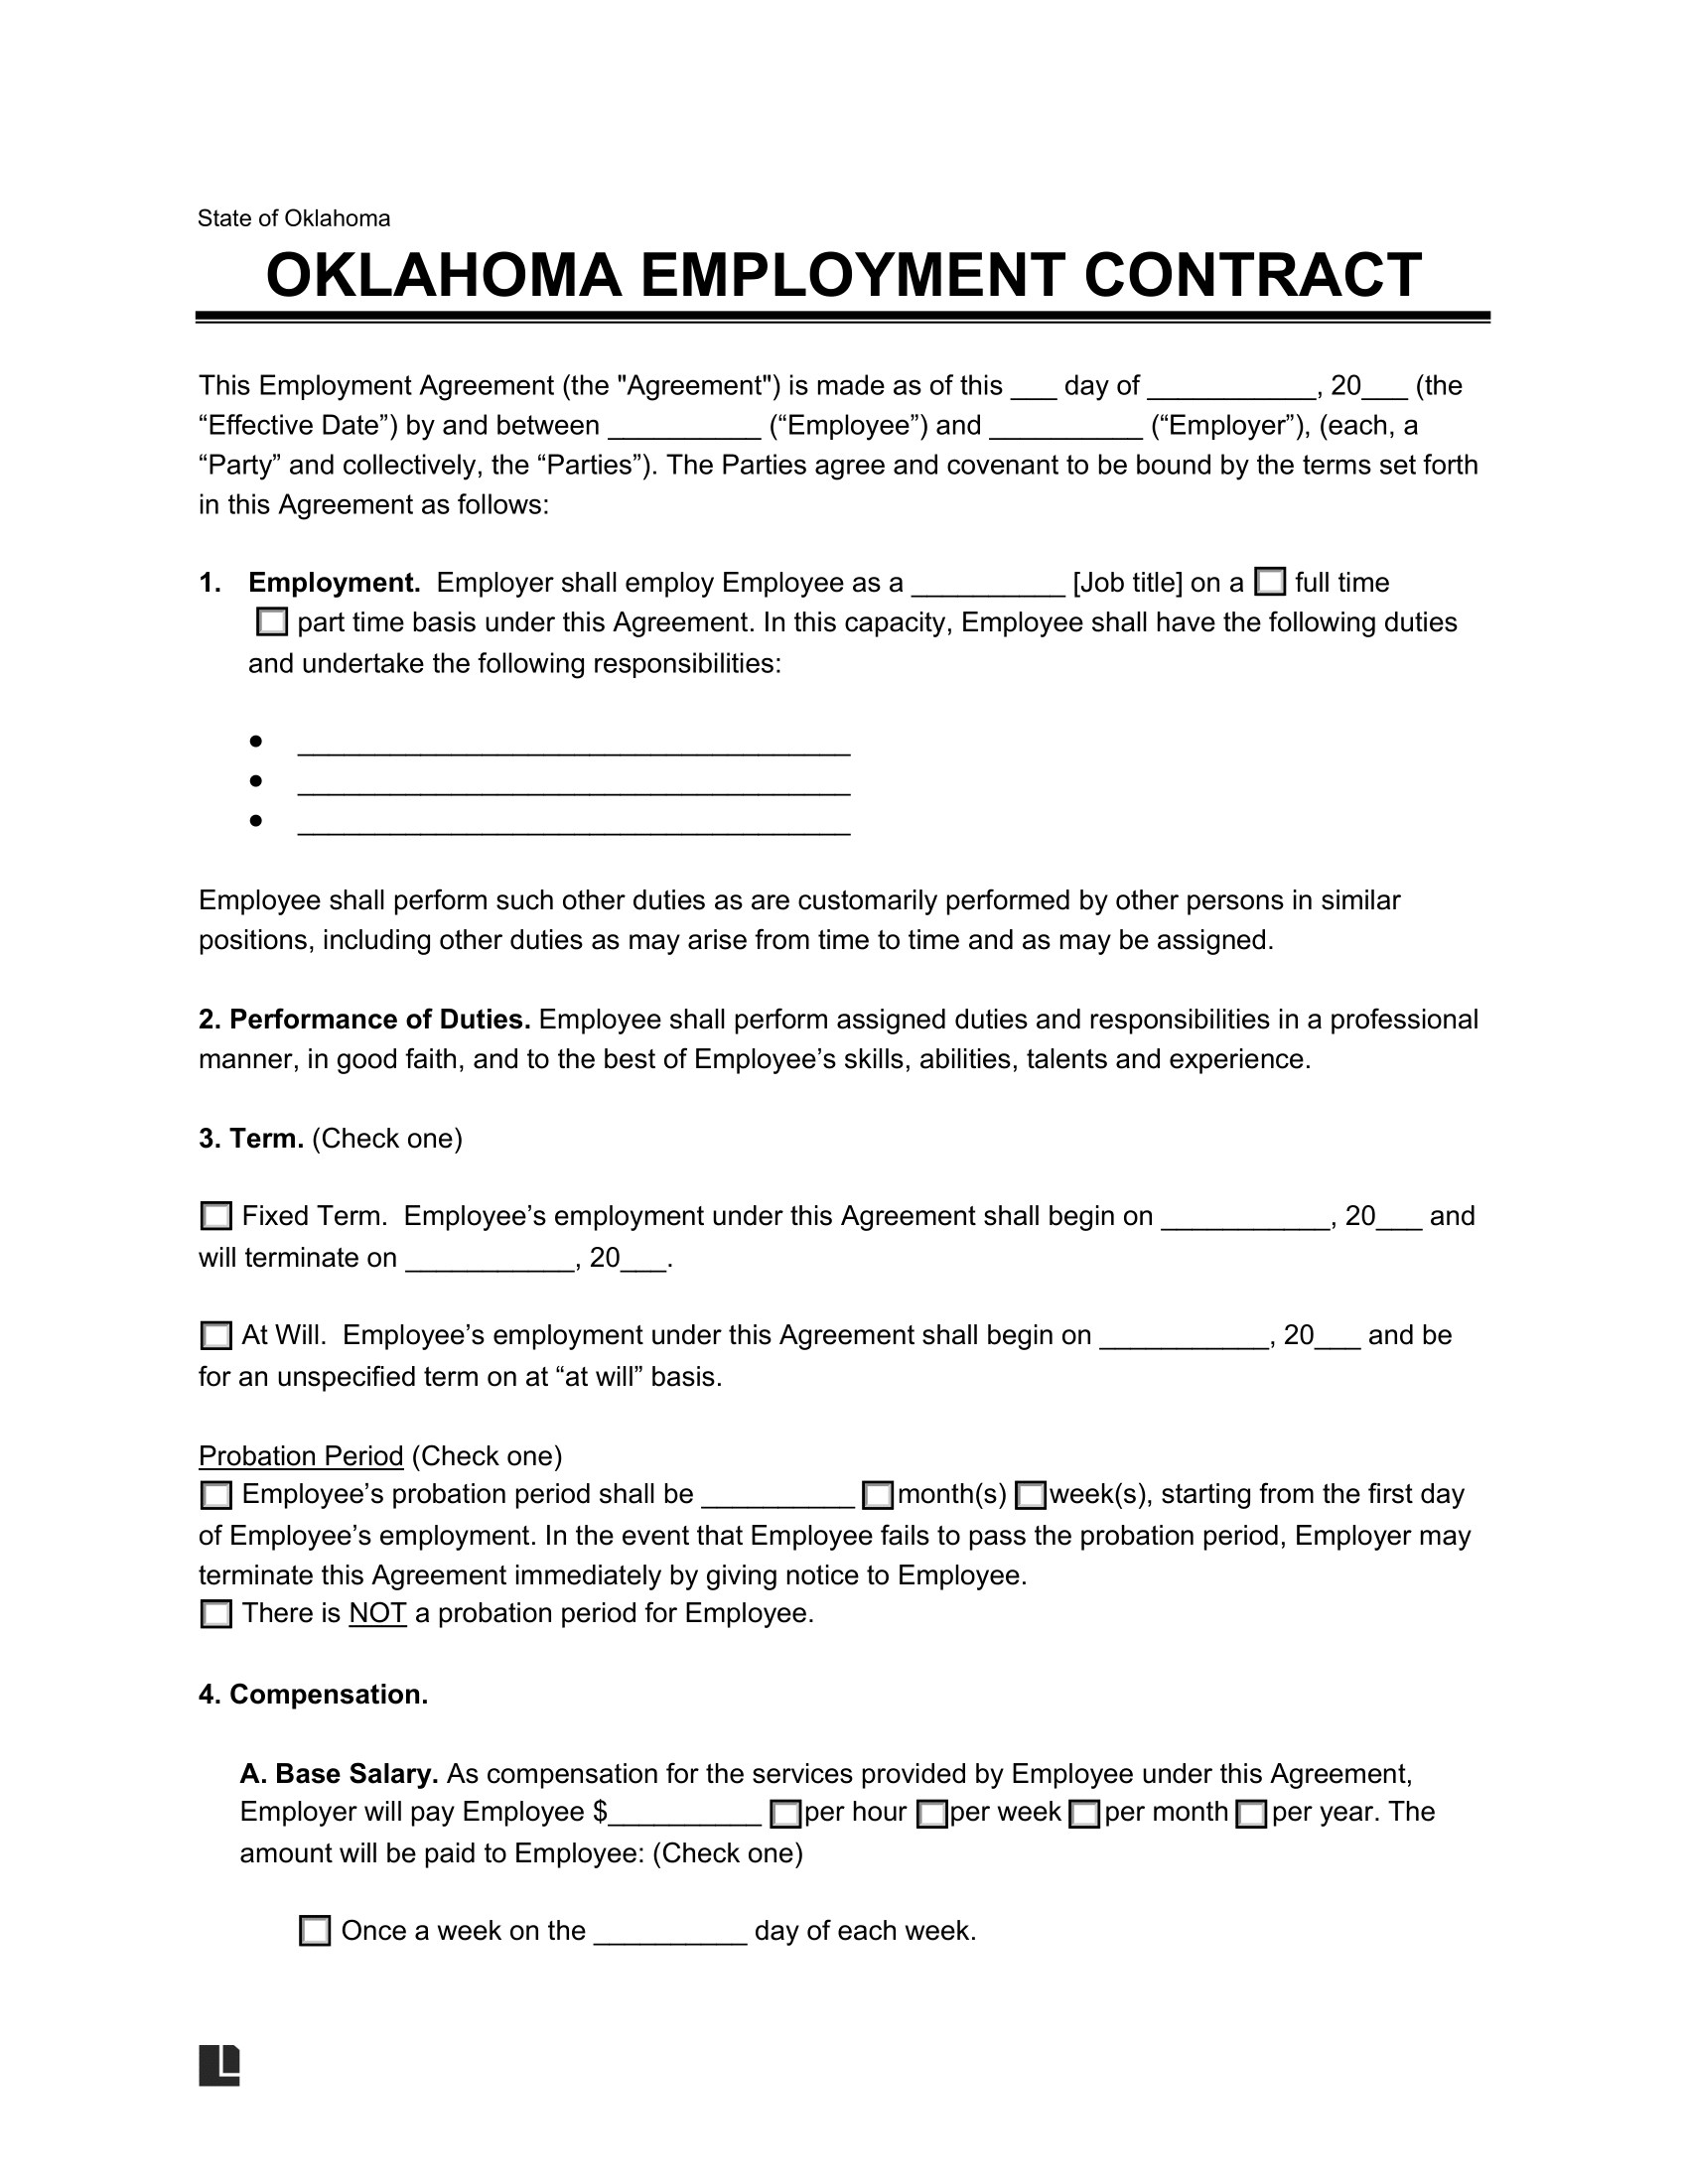 Oklahoma Employment Contract Template